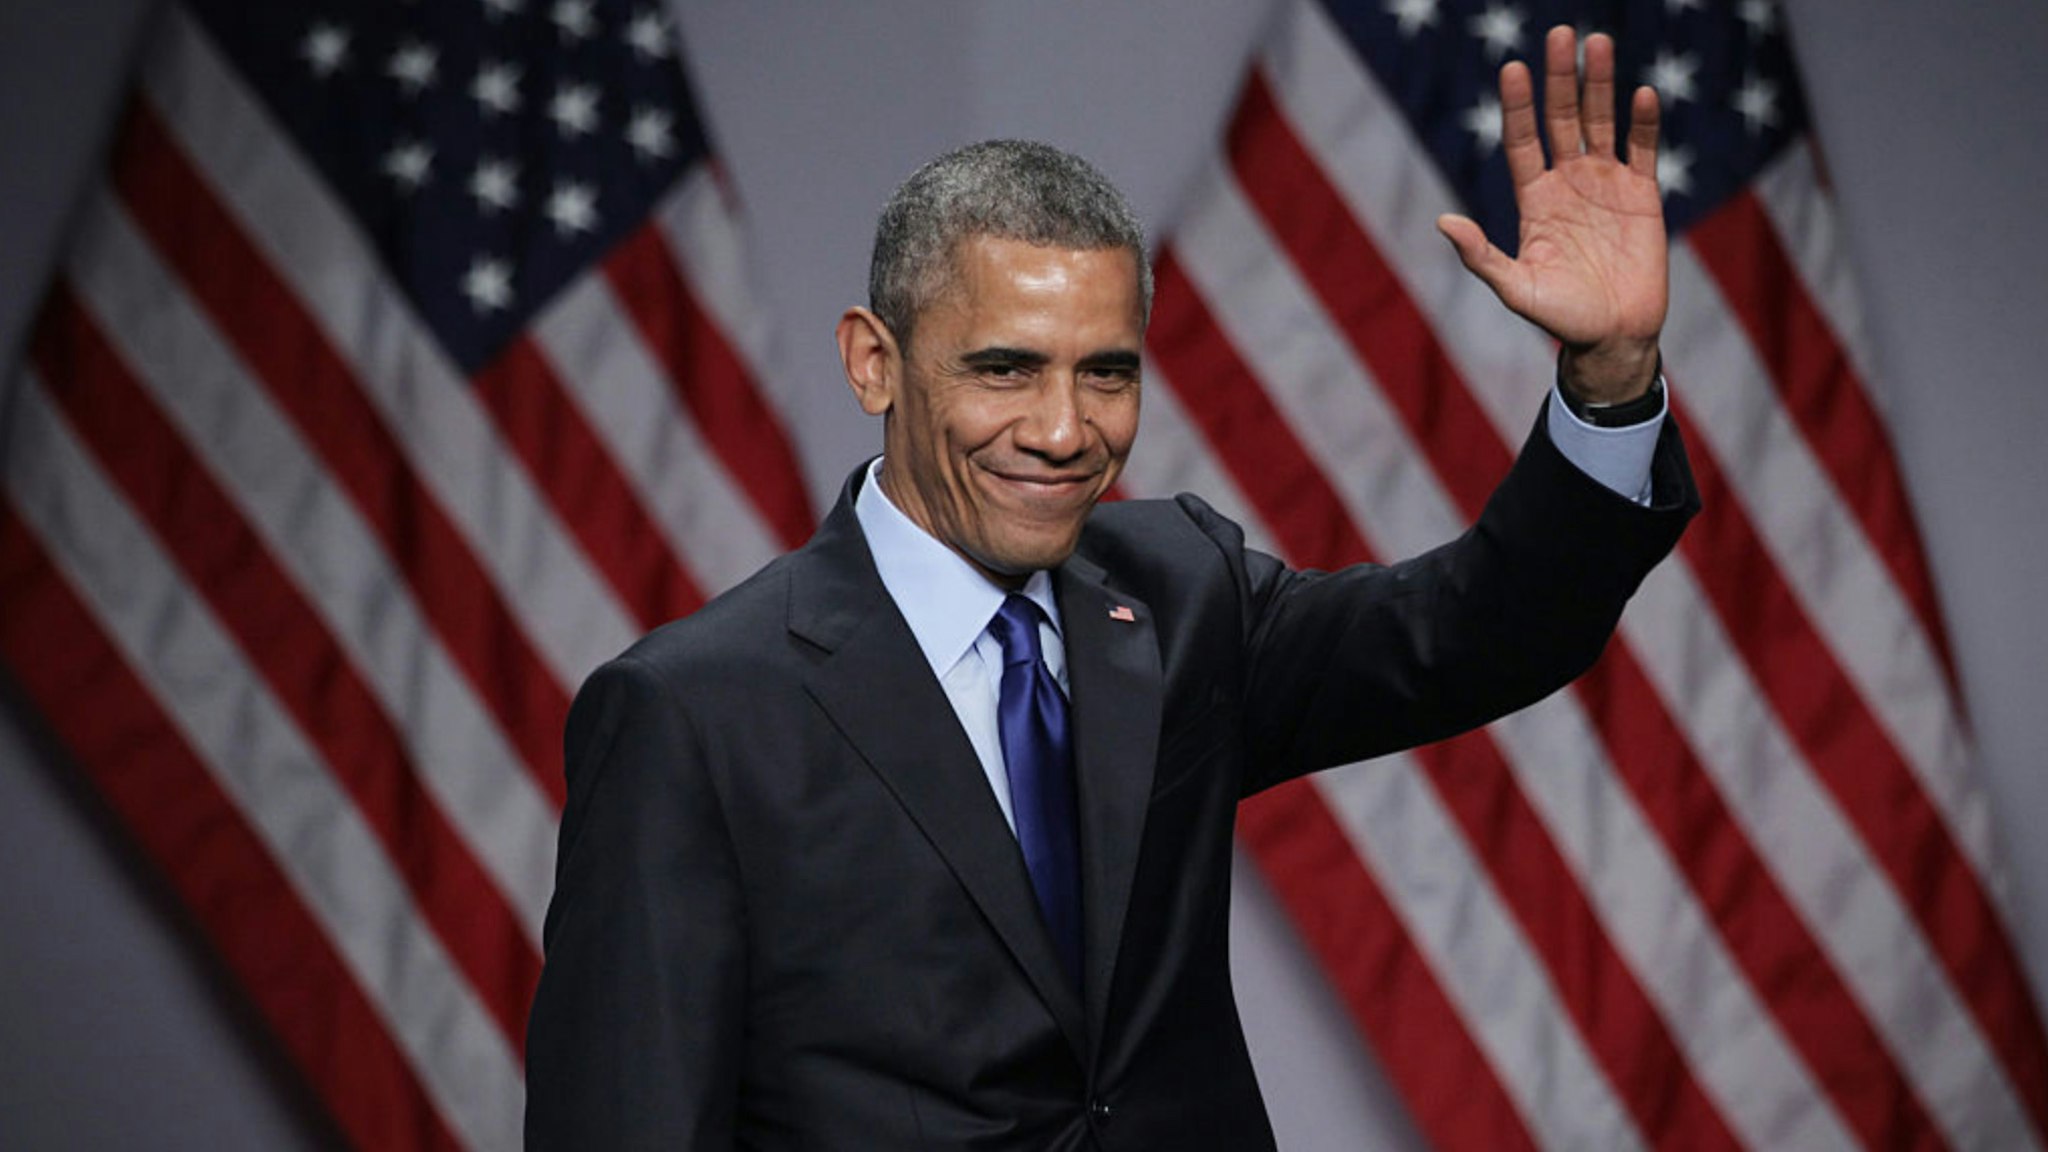 U.S. President Barack Obama waves after he spoke during the SelectUSA Investment Summit March 23, 2015 in National Harbor, Maryland.